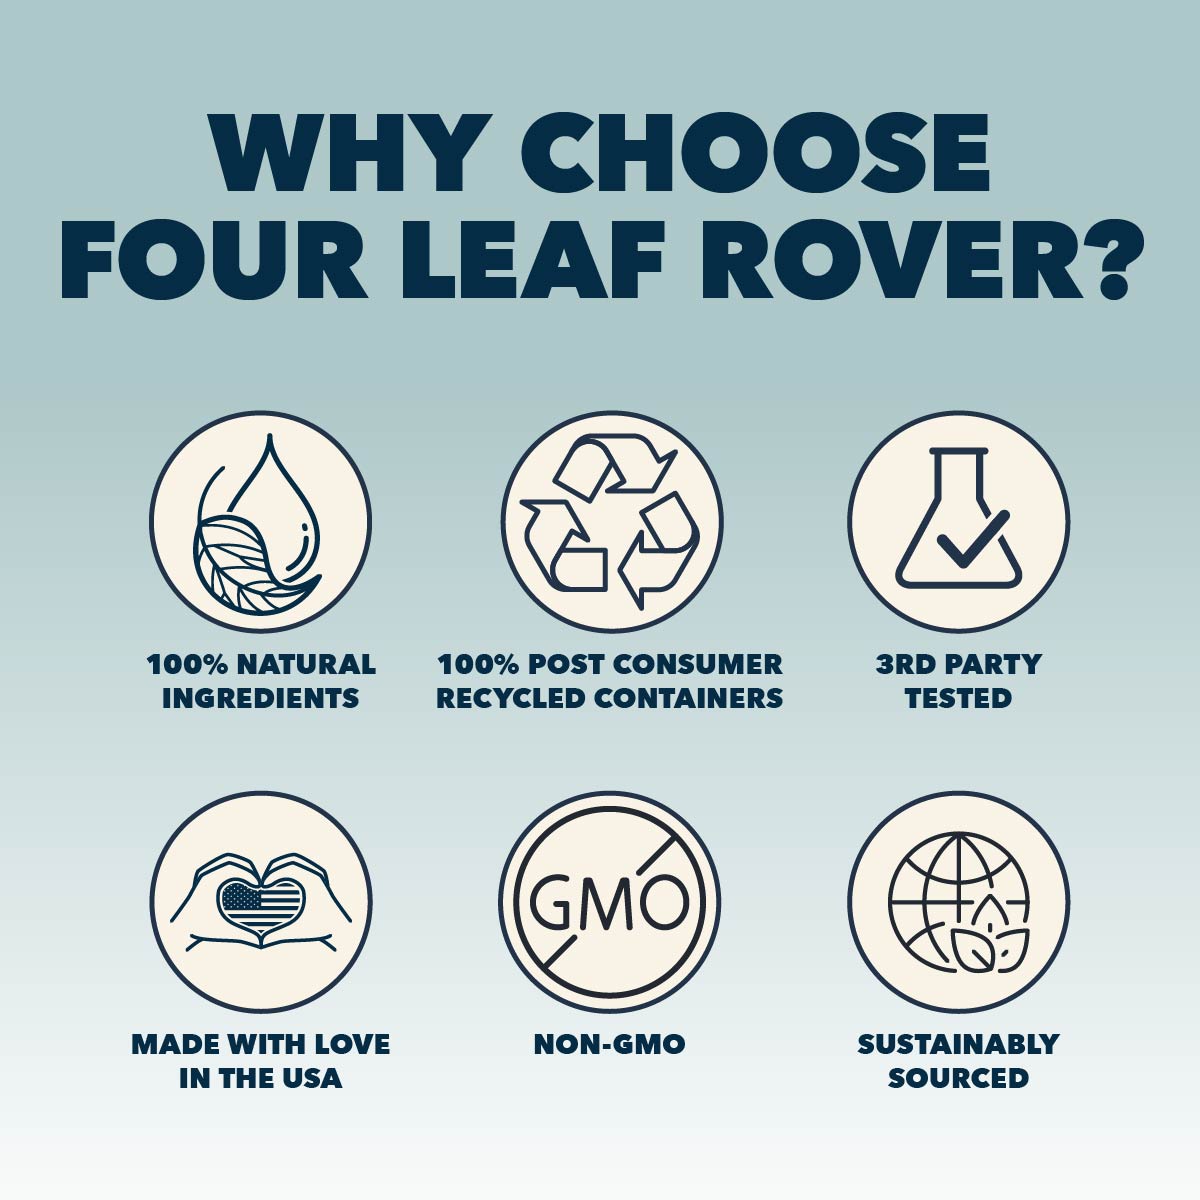 WHY CHOOSE FOUR LEAF ROVER 100% natural ingredients 100% post consumer recycled containers 3rd party tested made with love in the usa non-gmo sustainably sourced